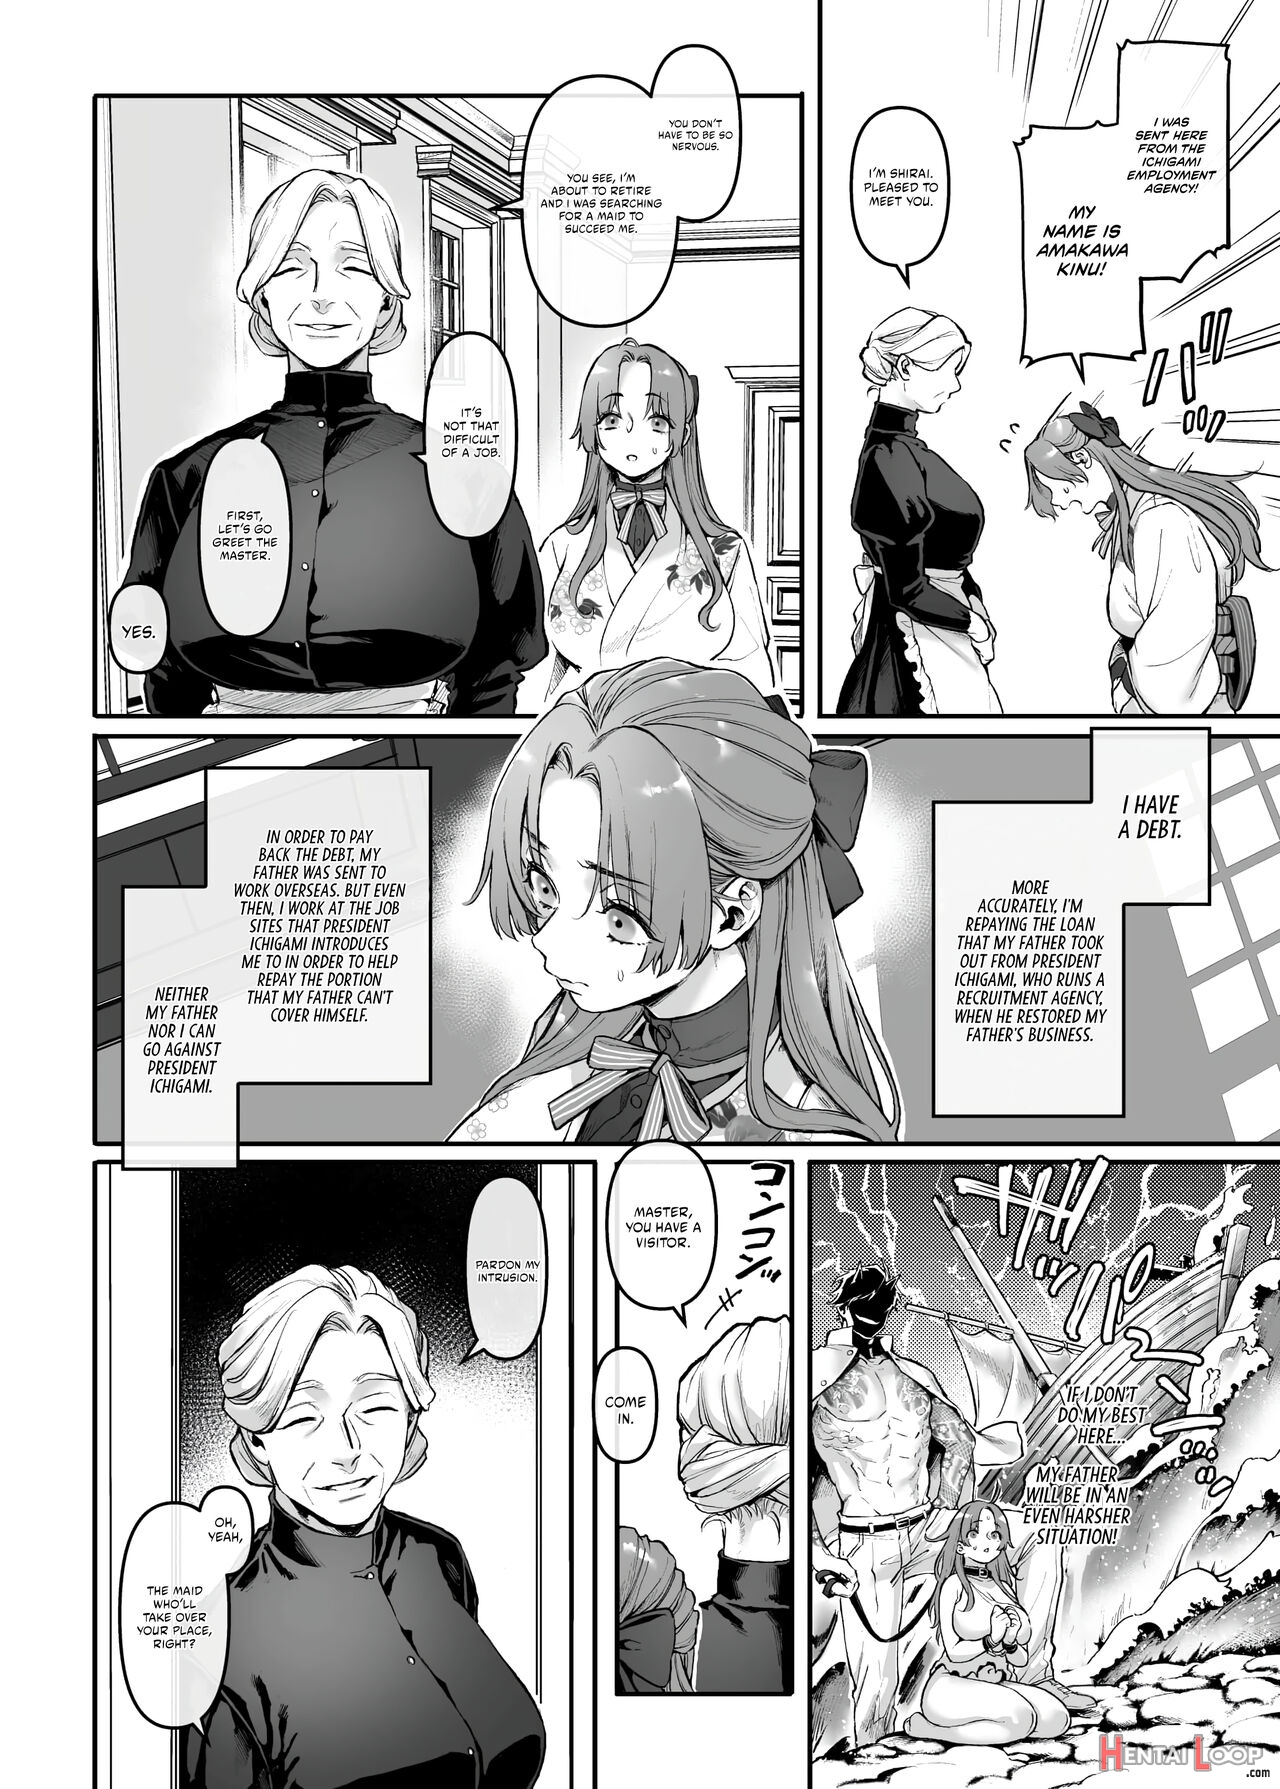 Infiltrate! Debt Repayment Rta Of A Spy On The Brink ~the Crossdressing Maid And The Oni Boss~ page 7